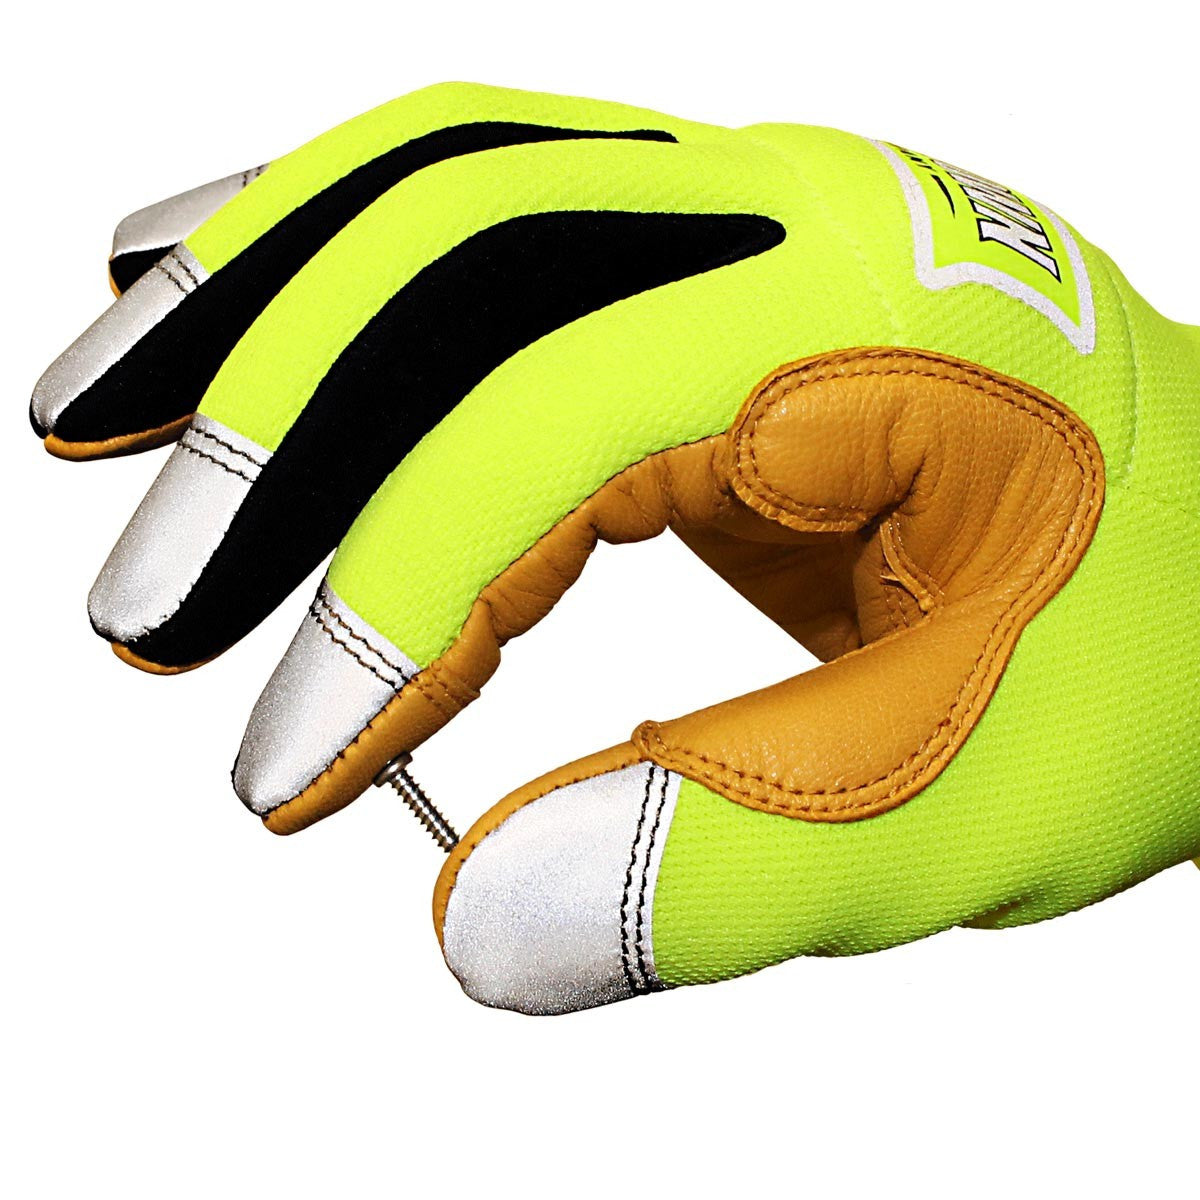 Kevlar Lined Leather Gloves with Knuckle Protection